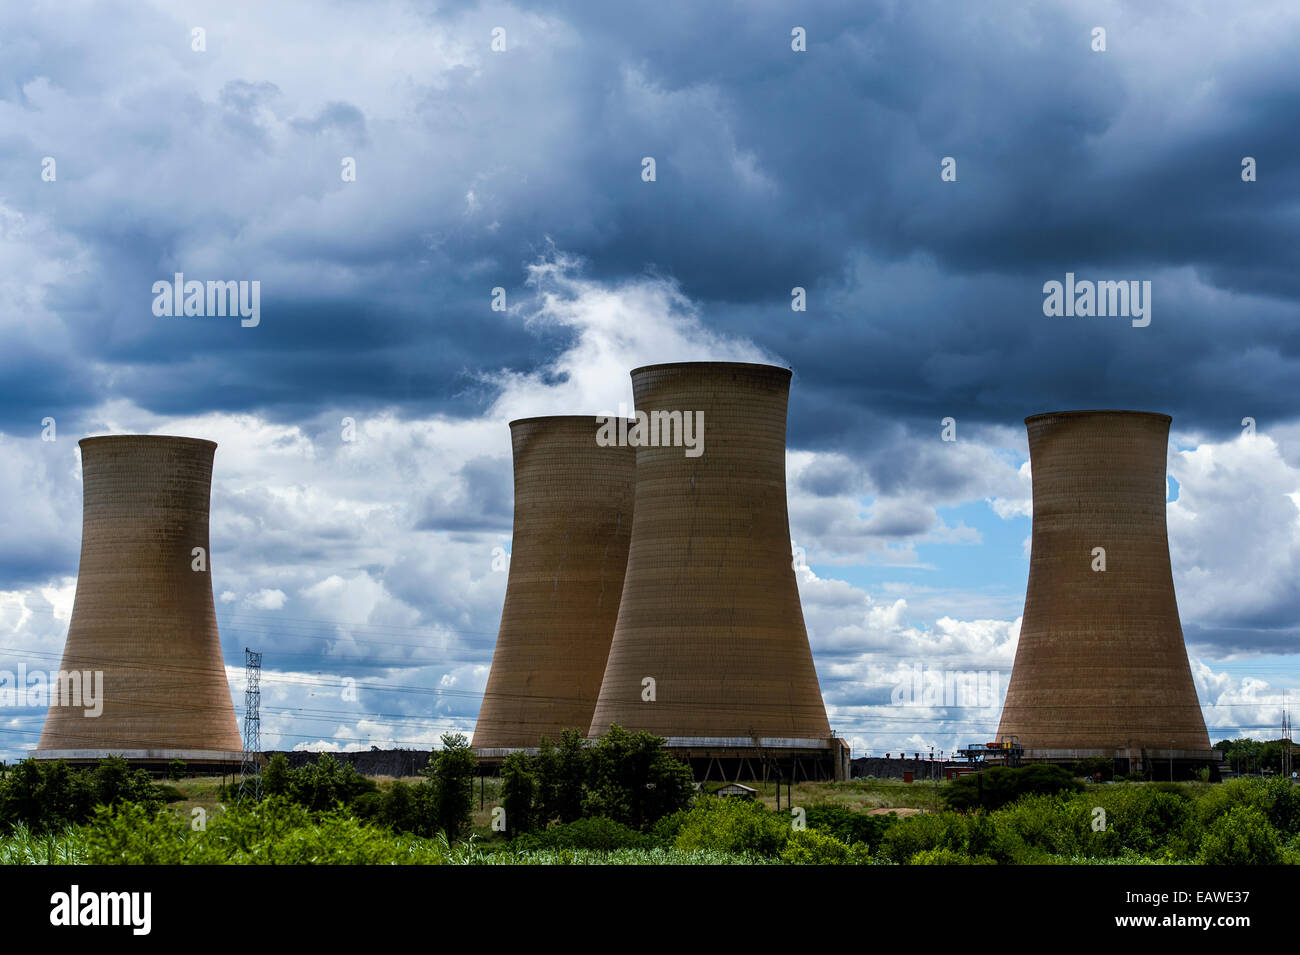 Steam rises from the cooling towers of an electricity power station. Stock Photo